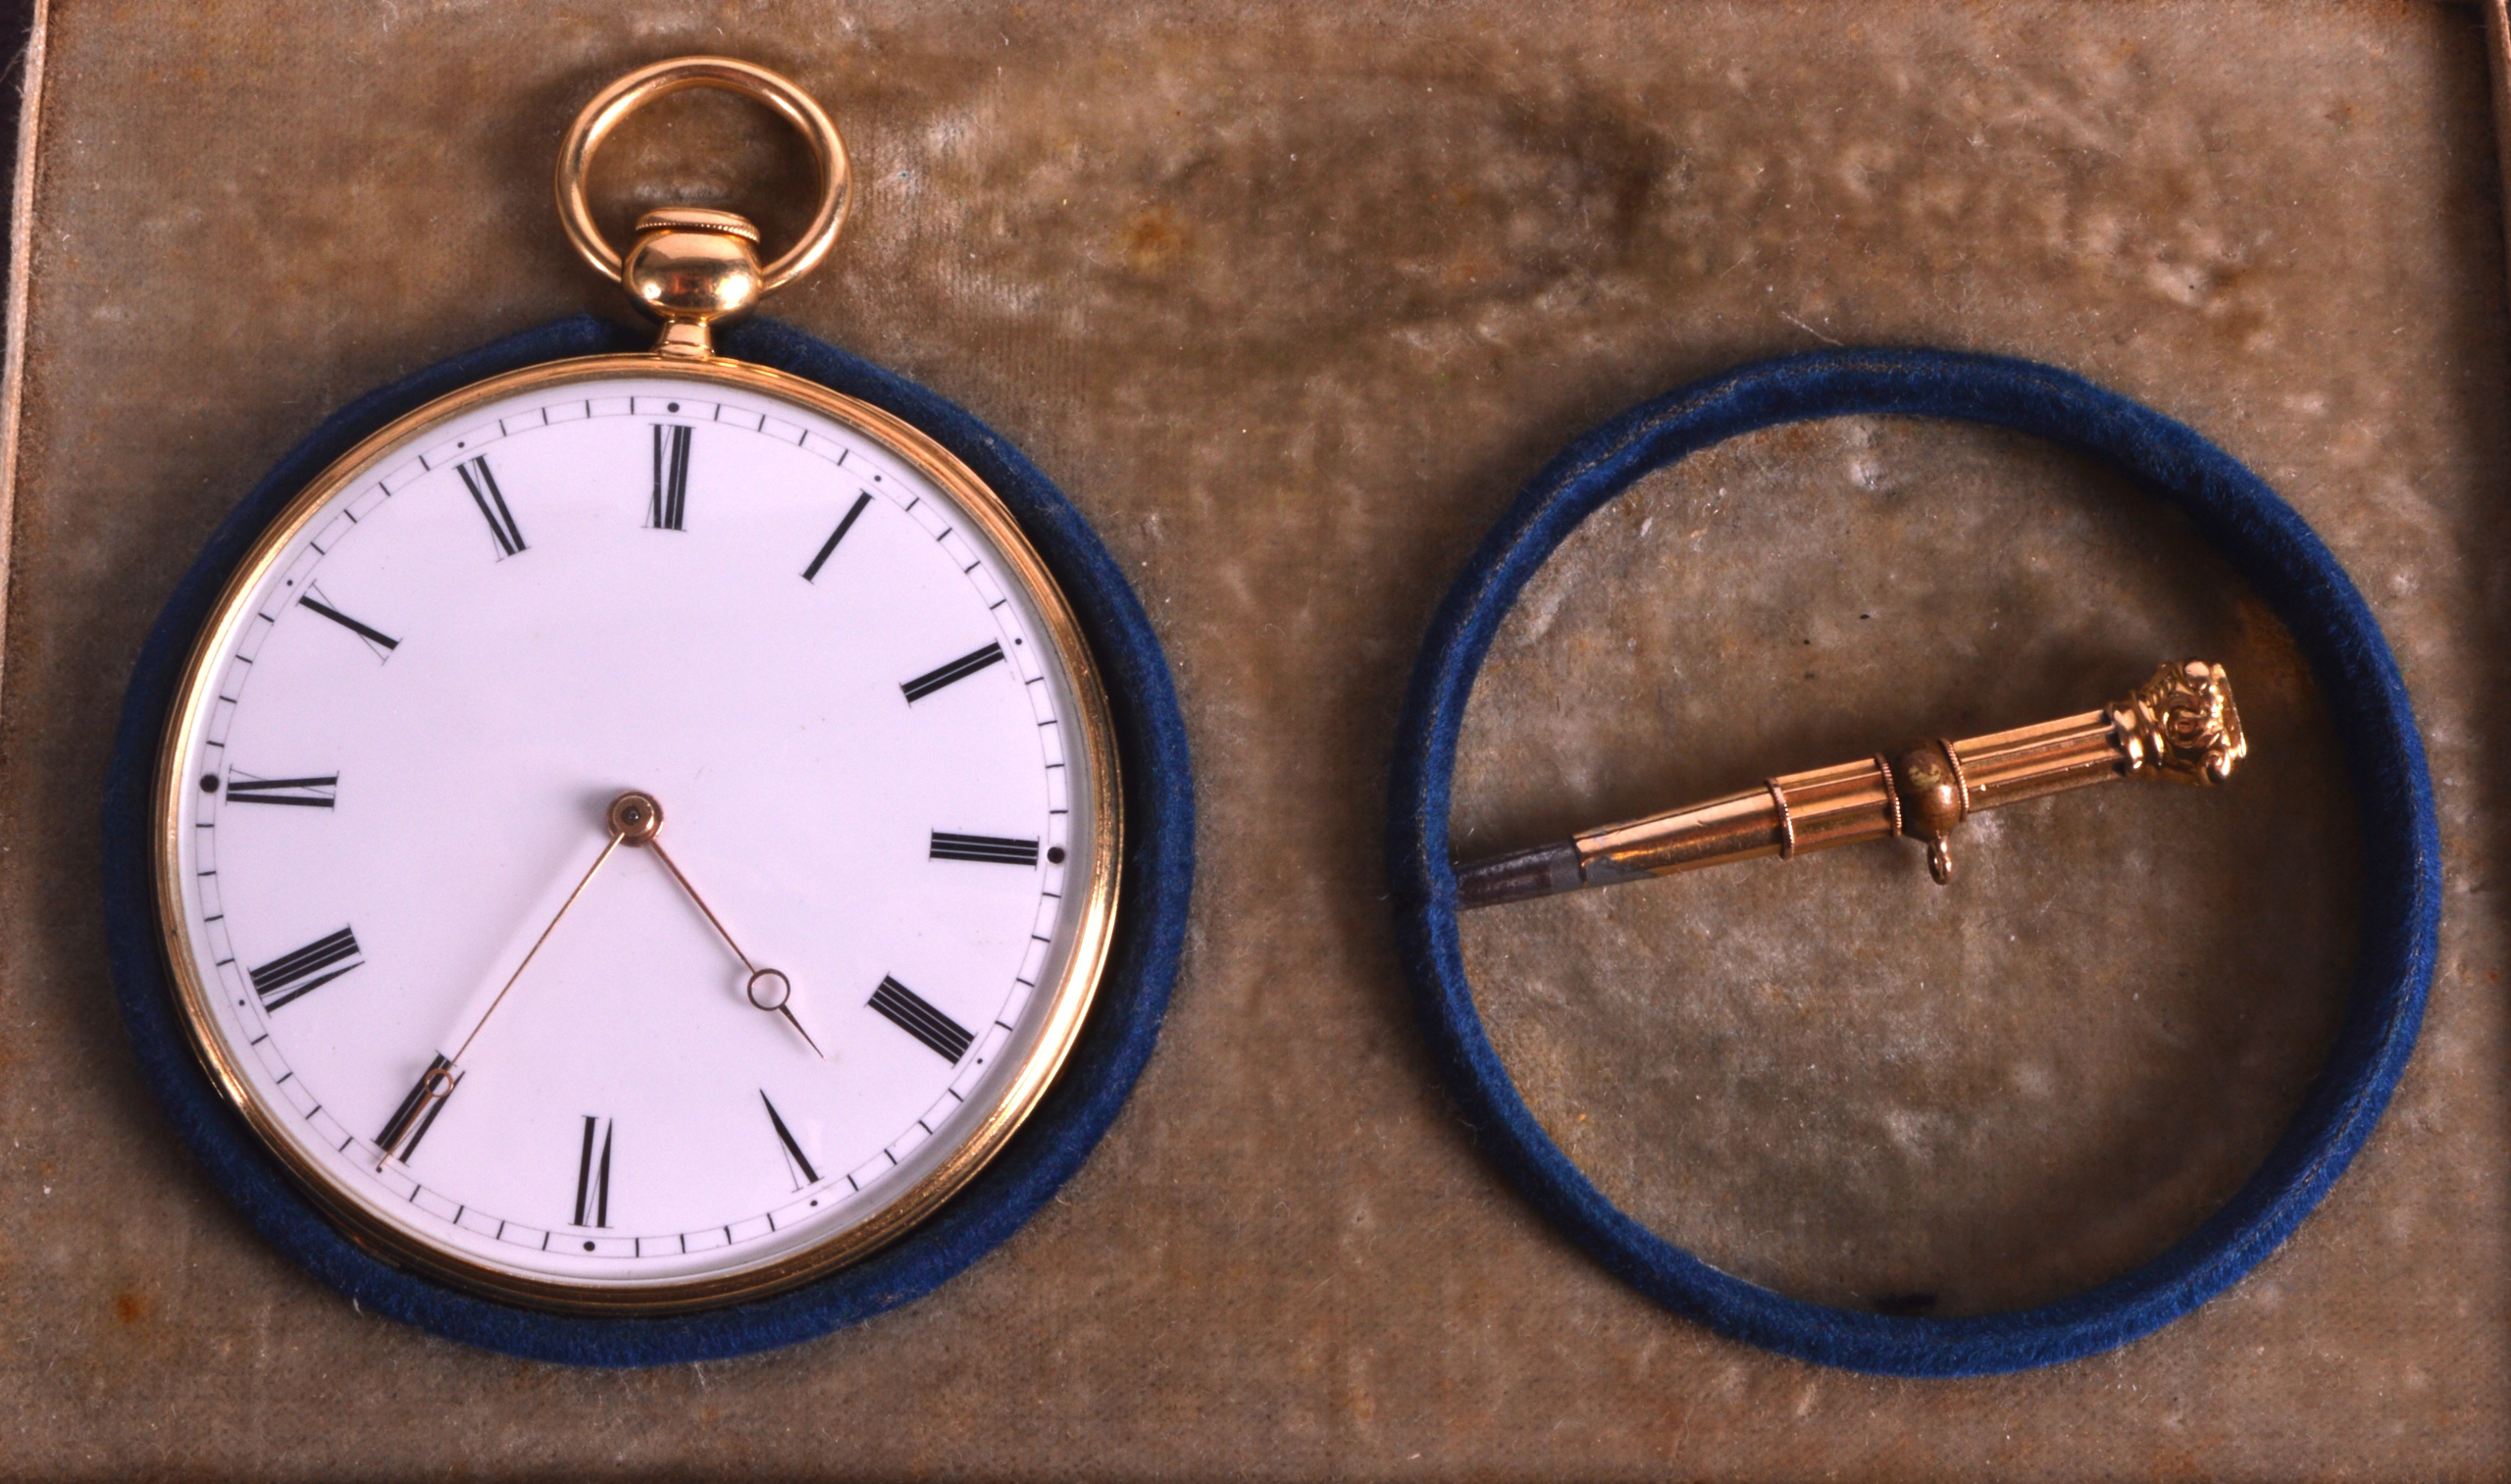 A FINE 19TH CENTURY FRENCH 18CT YELLOW GOLD REPEATING POCKET WATCH in original fitted box. (2)